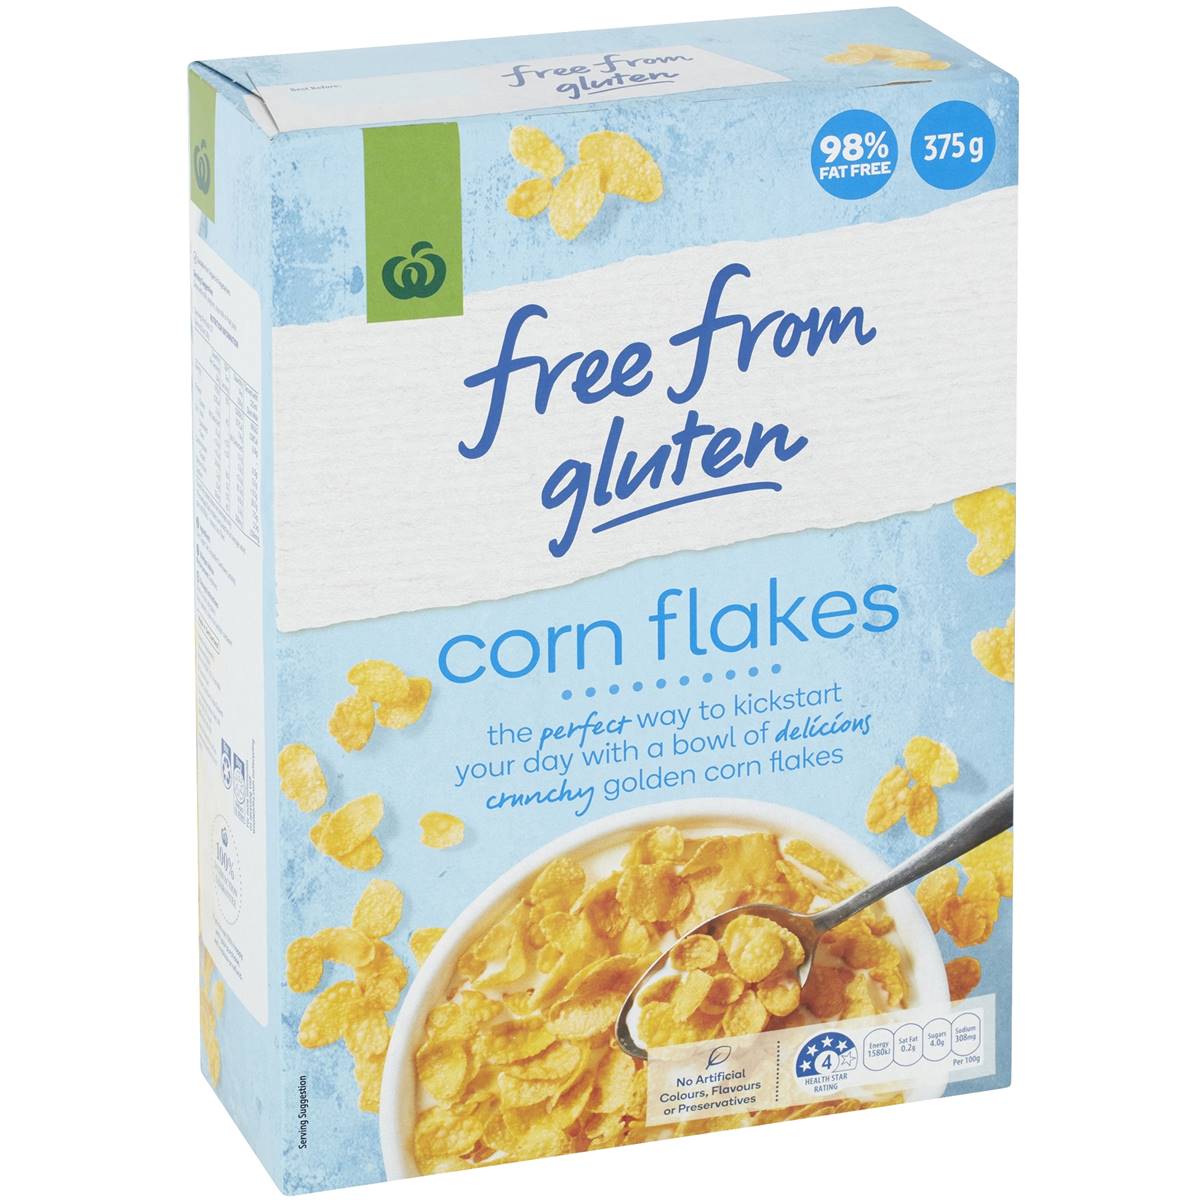 Calories in Woolworths Free From Gluten Cereal Cornflakes